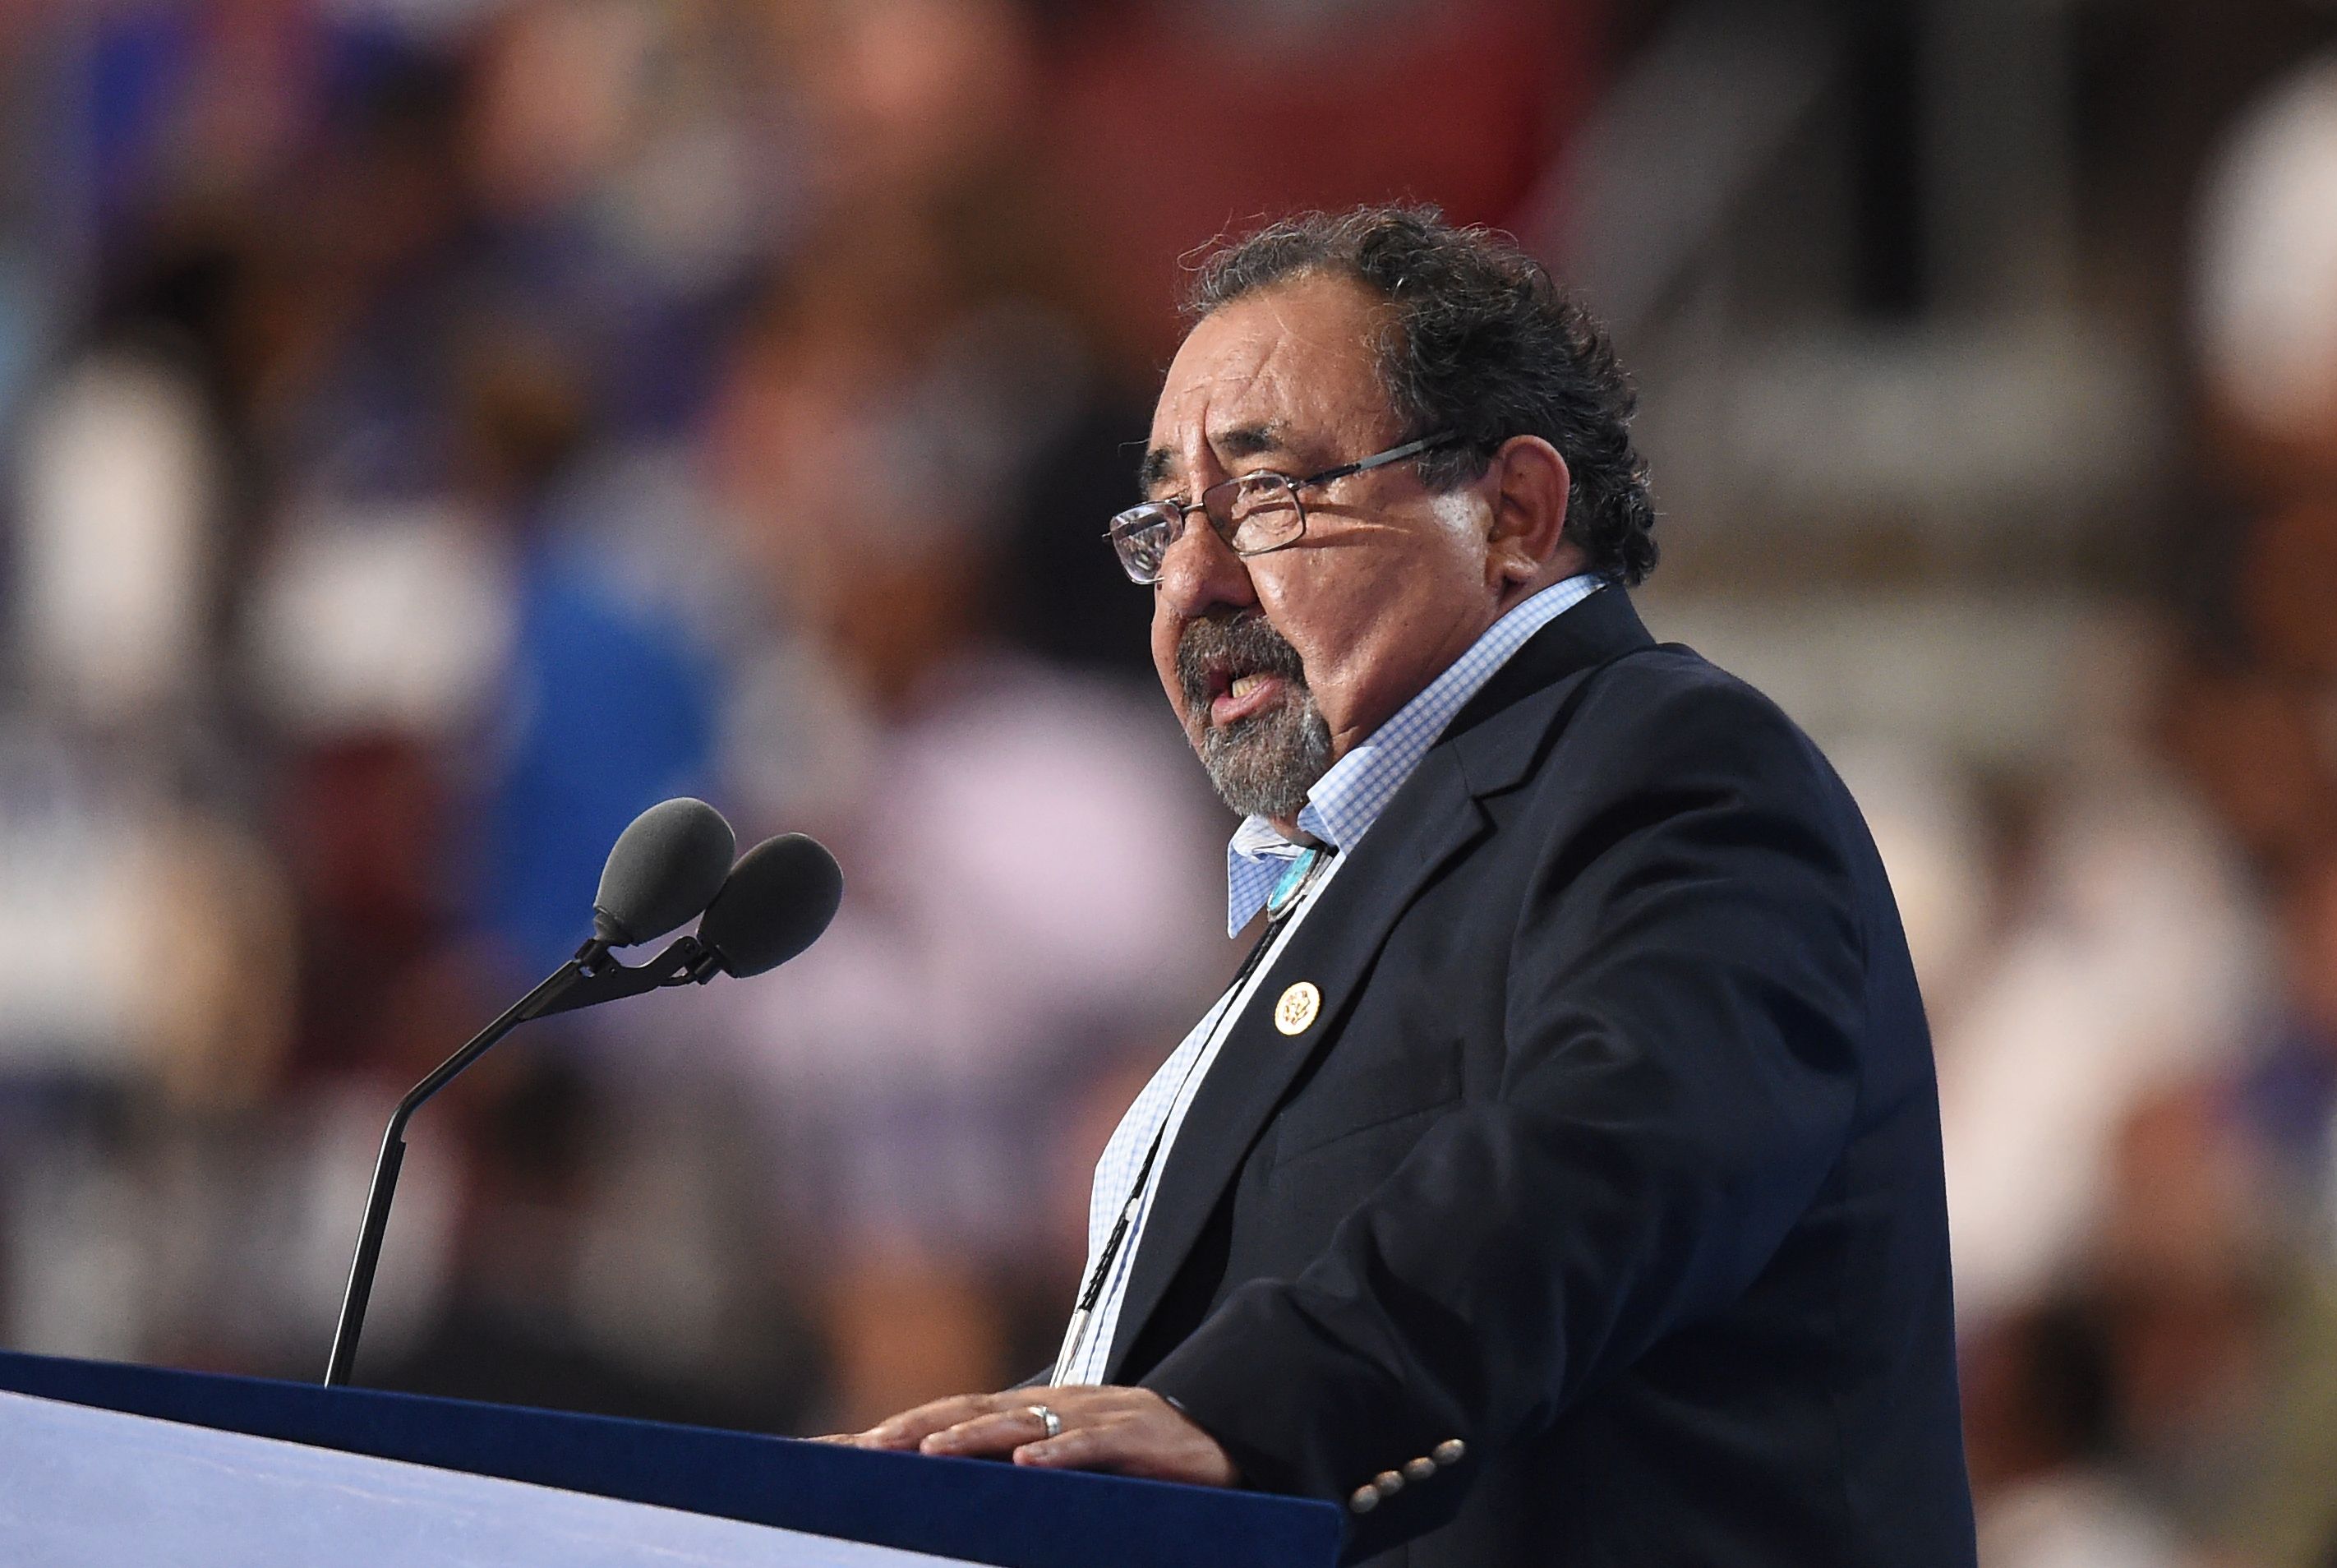 US House representative (AZ) Raul Grijalva speaks during Day 1 of the Democratic National Convention at the Wells Fargo Center in Philadelphia on July 25, 2016. (Robyn Beck—AFP/Getty Images)